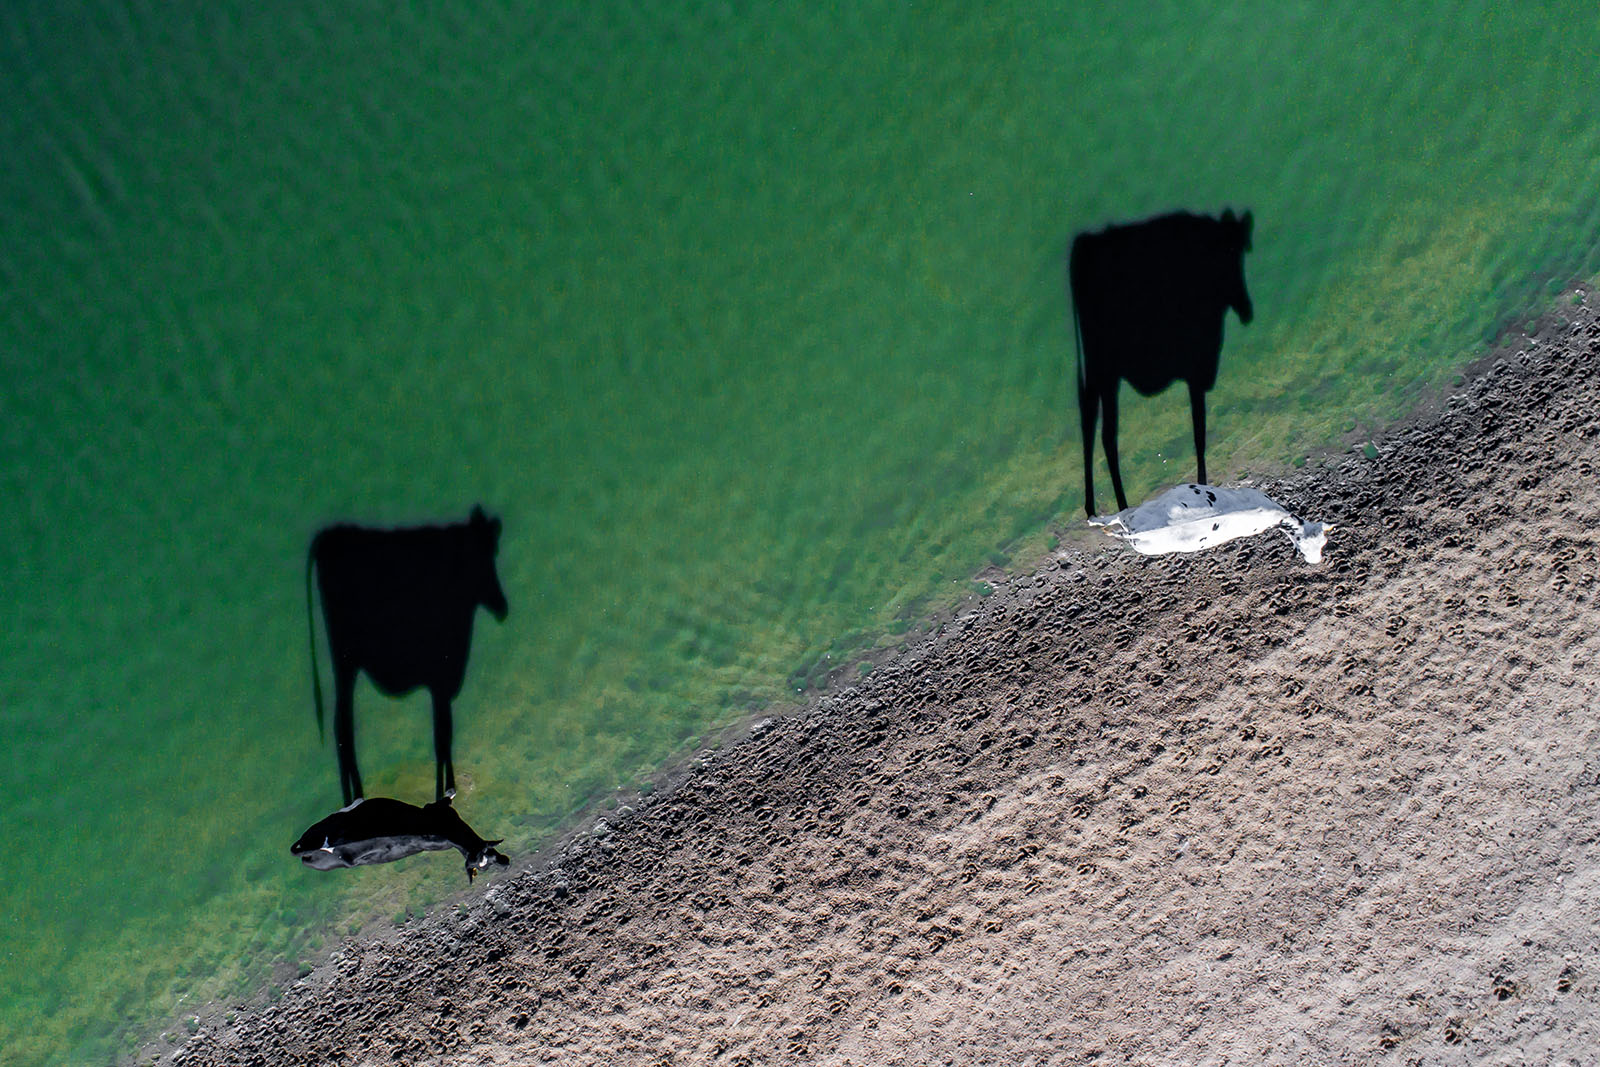 dronestagram photography contest 2017 two moo by luke bell